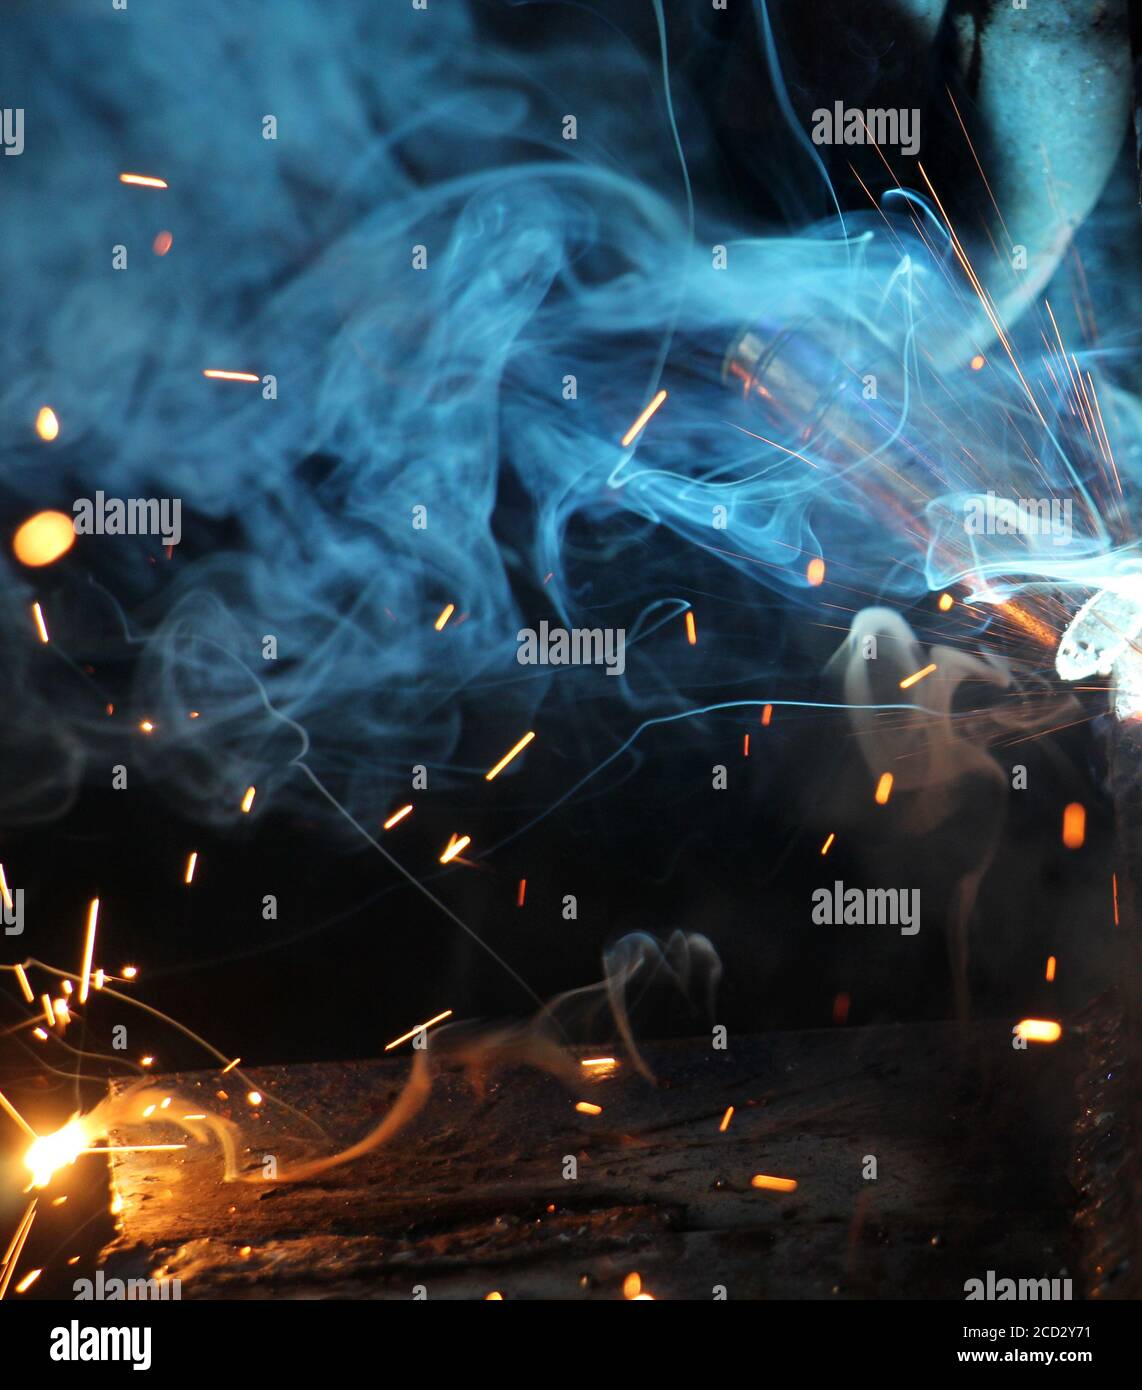 Welding work.sparks and smoke of a welding work,image of a Stock Photo